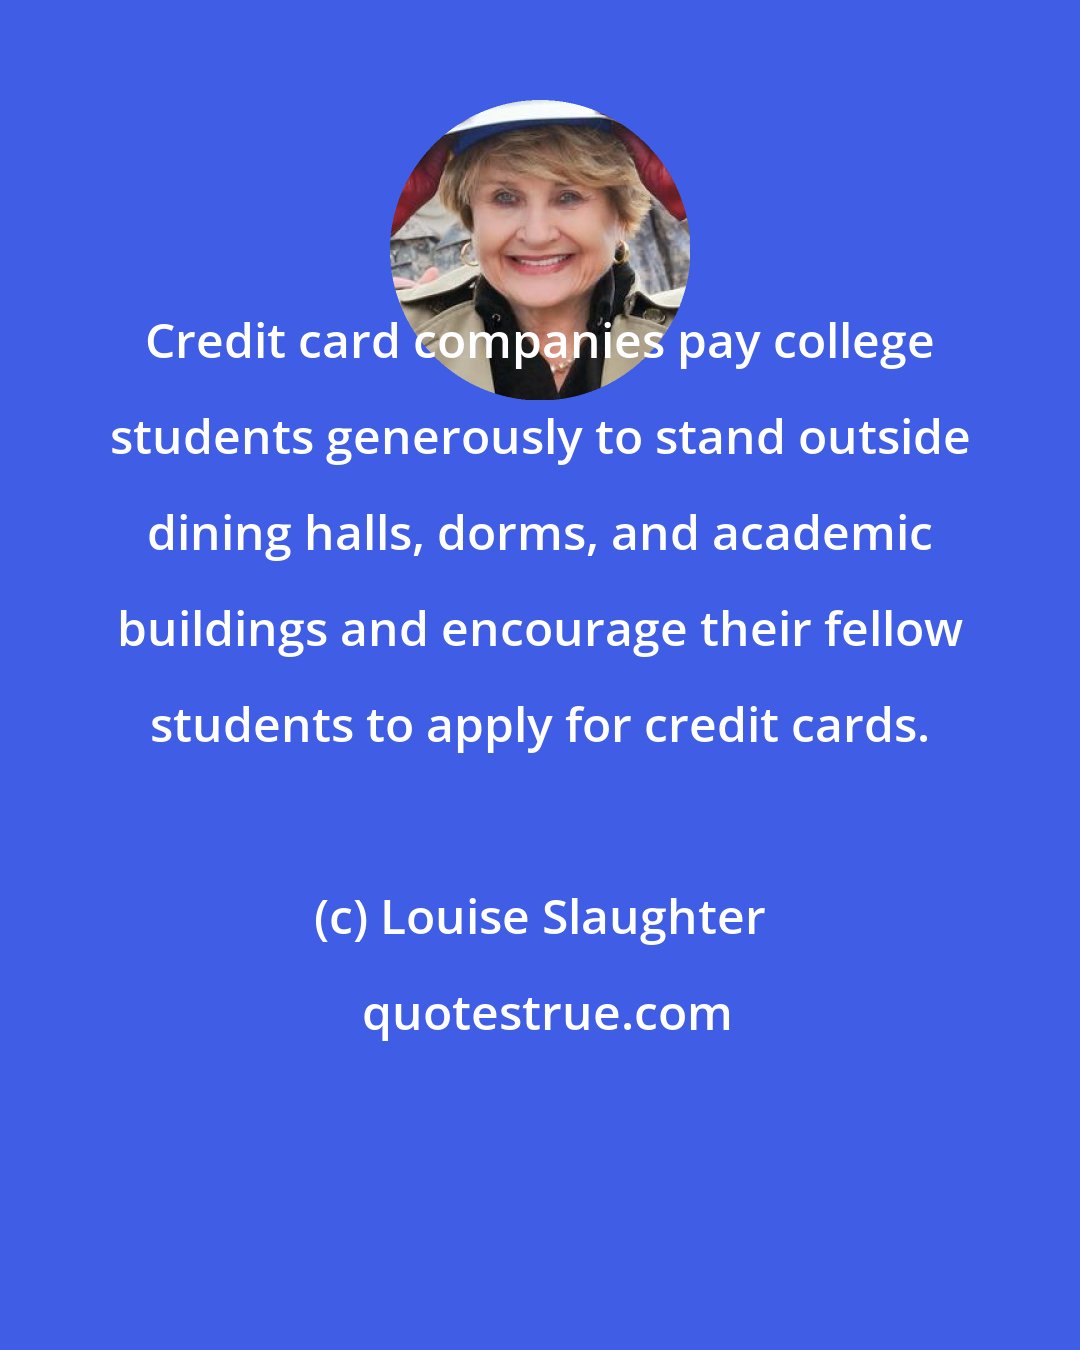 Louise Slaughter: Credit card companies pay college students generously to stand outside dining halls, dorms, and academic buildings and encourage their fellow students to apply for credit cards.